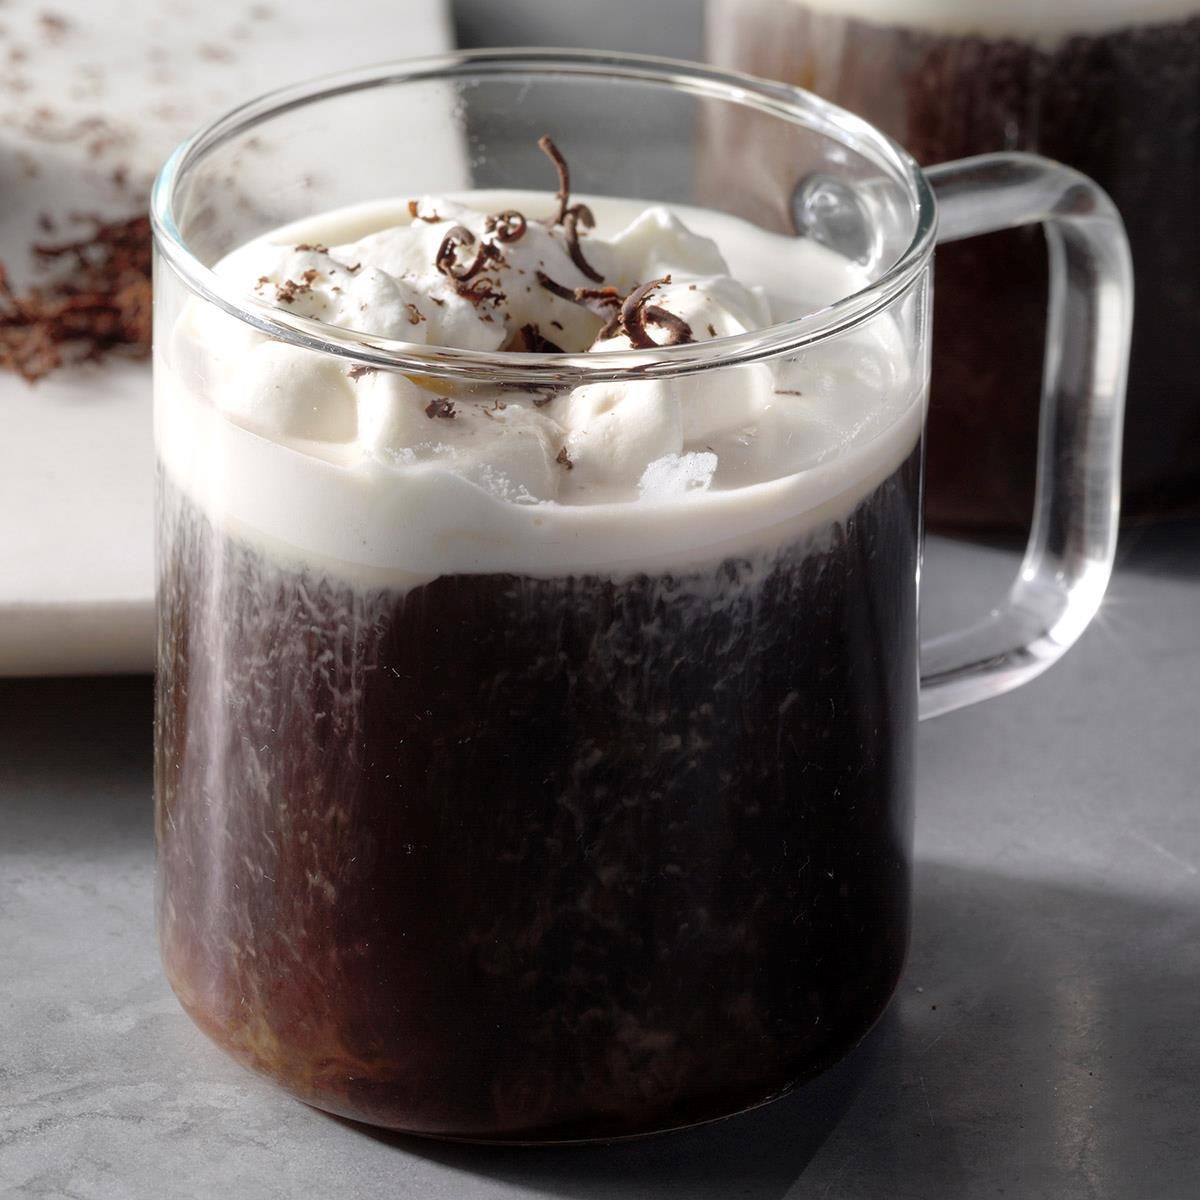 Kahlua Coffee Recipe: How to Make This Drink At Home